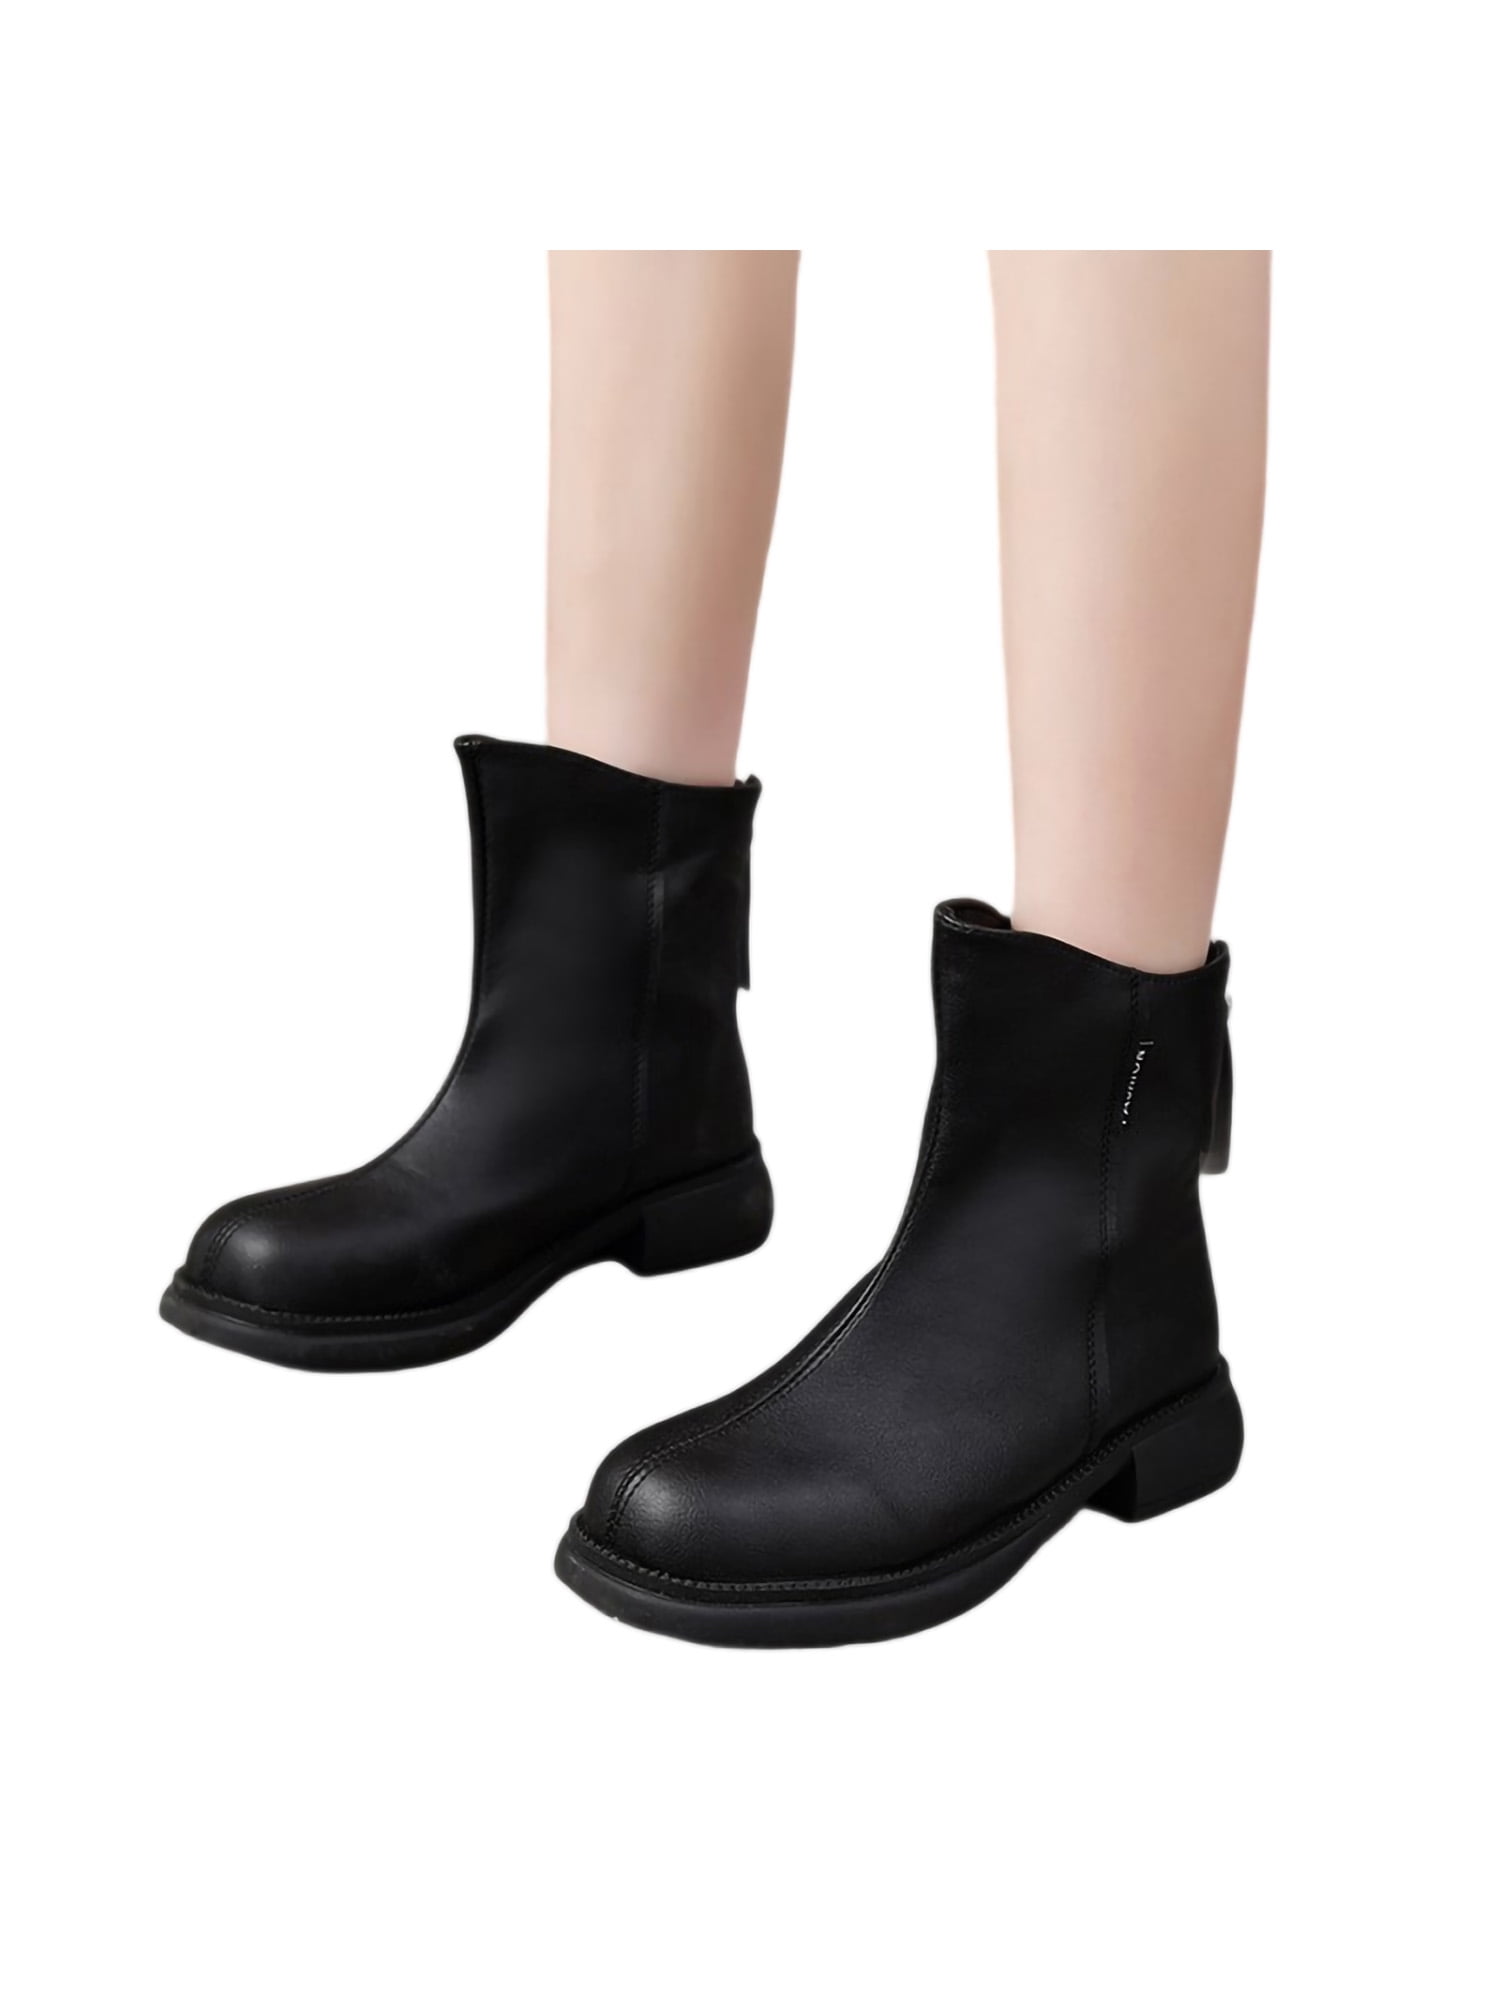 UKAP Ladies Winter Boot Slip On Chelsea Boots Casual Ankle Bootie ...